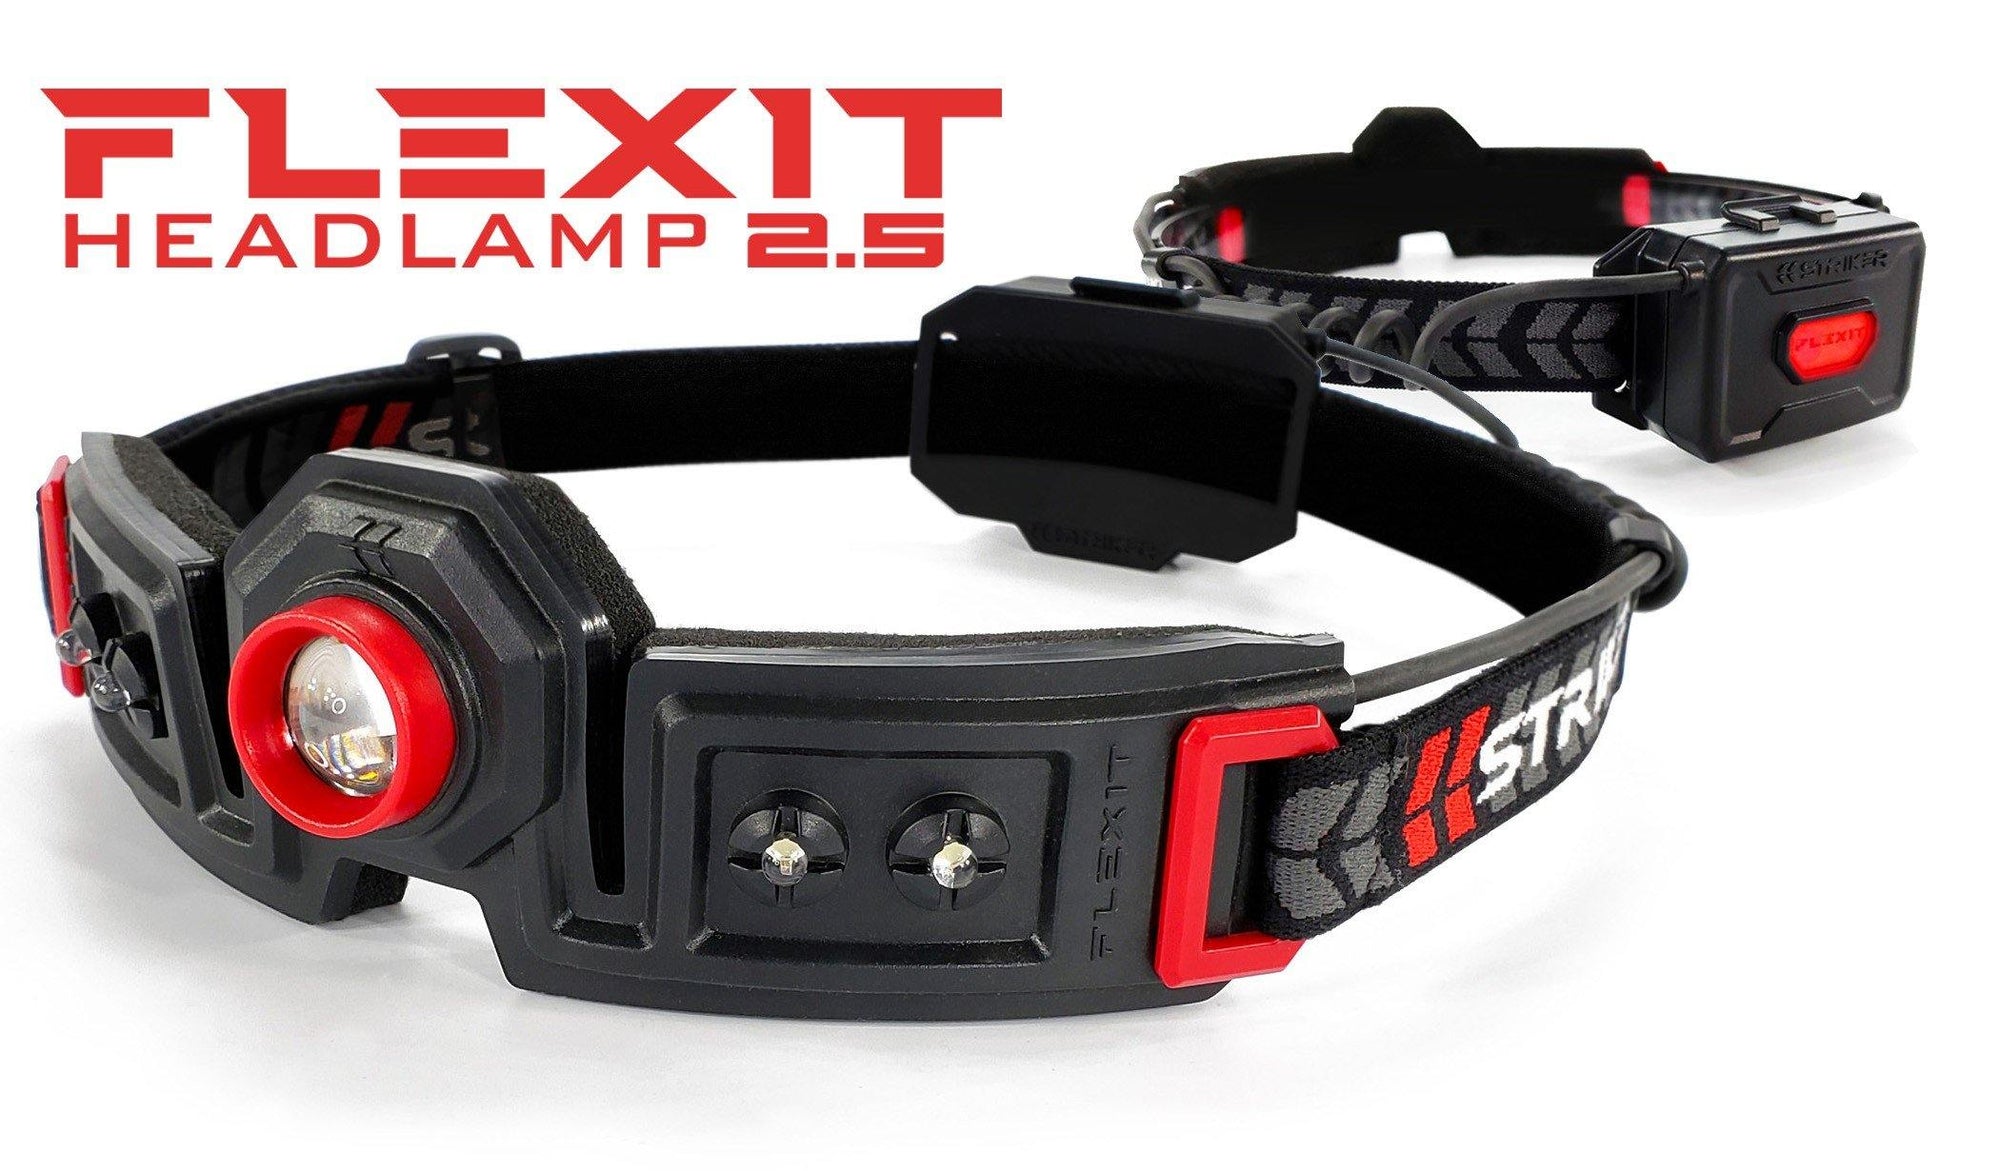 The STKR Concepts® FLEXIT Headlamp 2.5 Hands-Free “HALO” Lighting with Comfort - Risk Racing